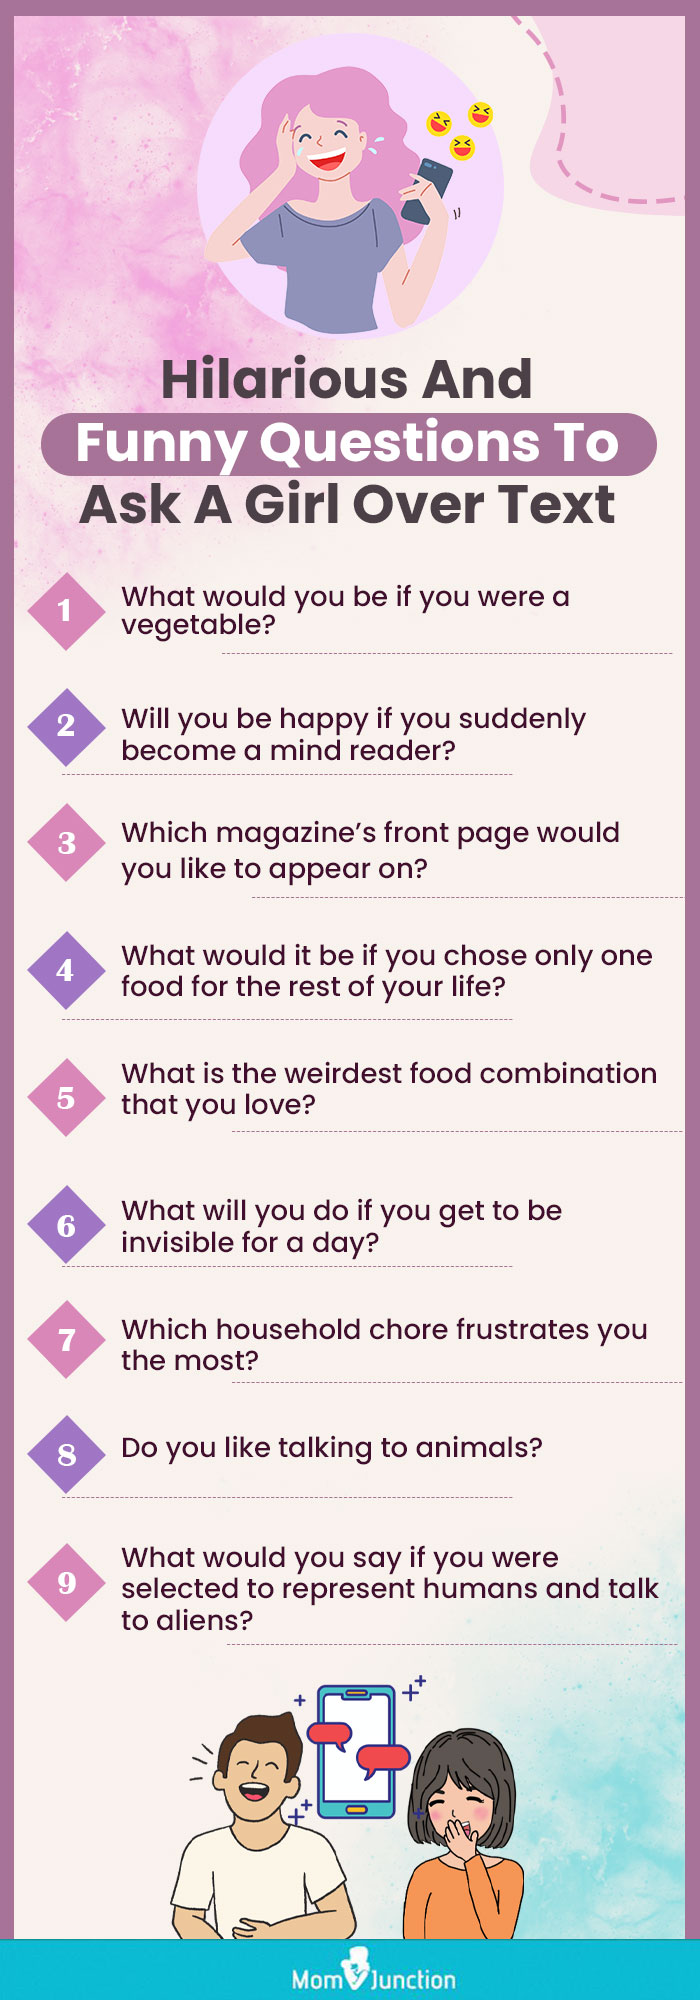 hilarious and funny questions to ask a girl over text (infographic)